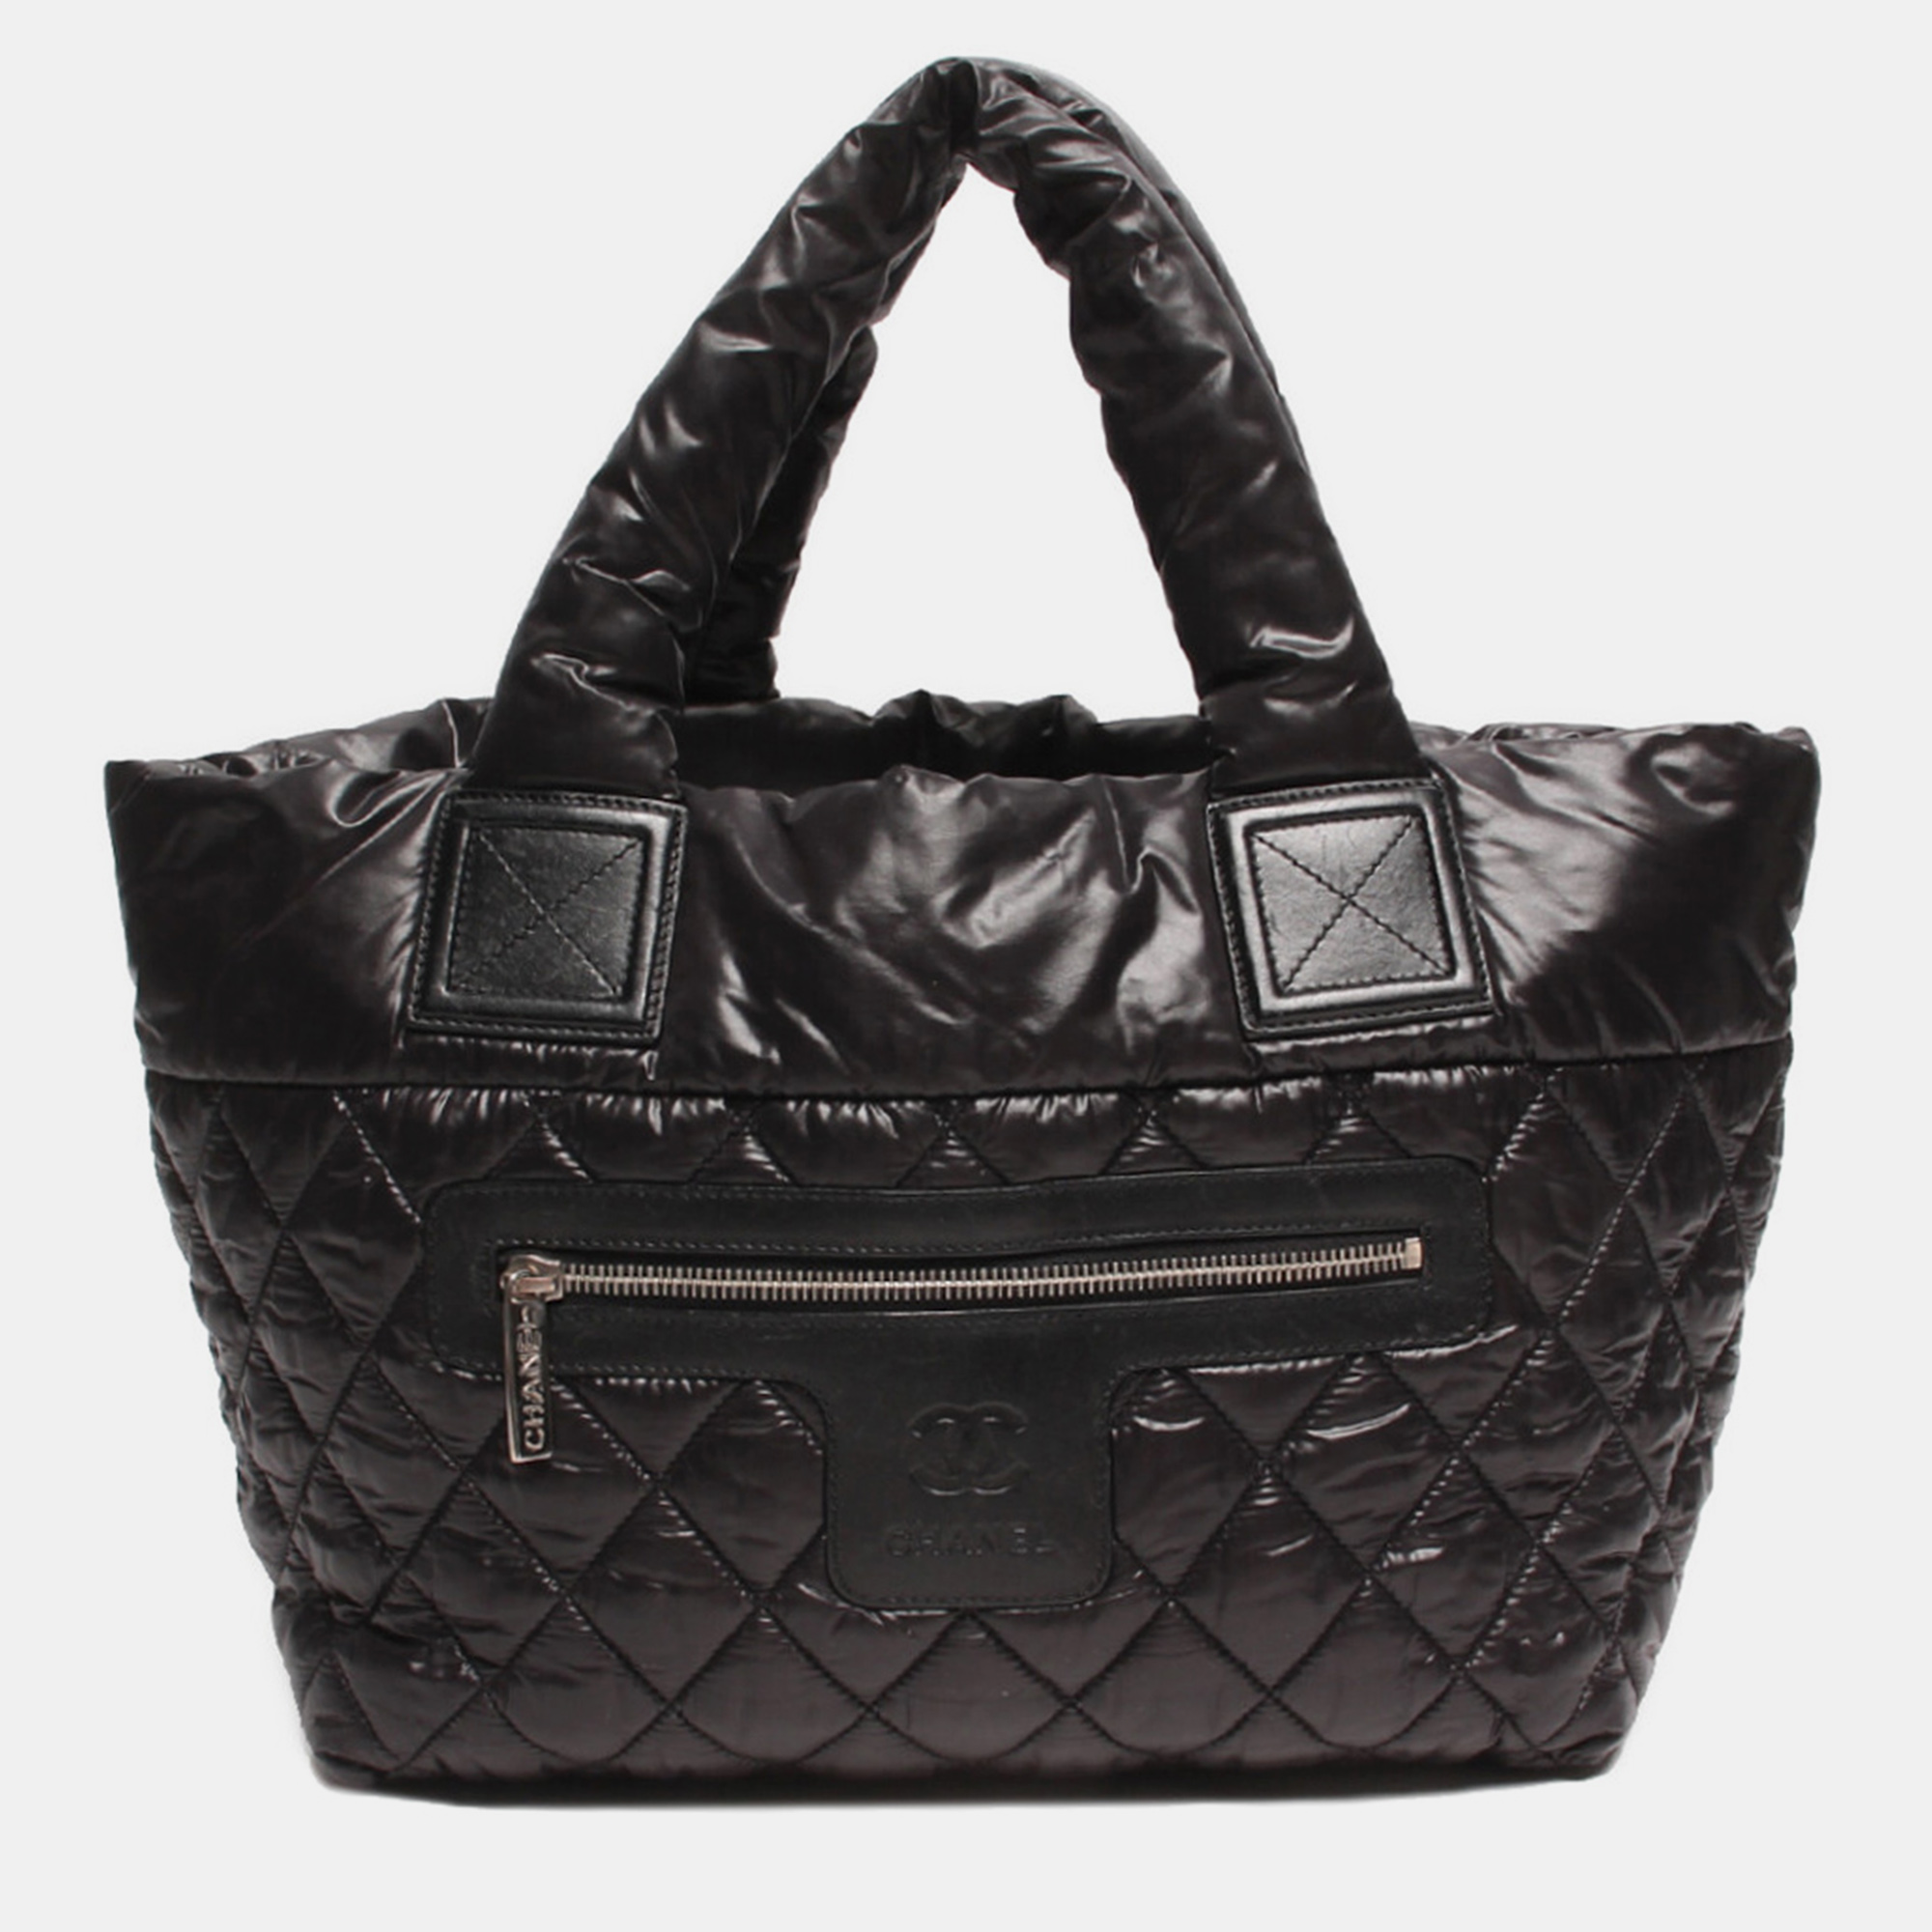 Chanel coco cocoon large reversible tote